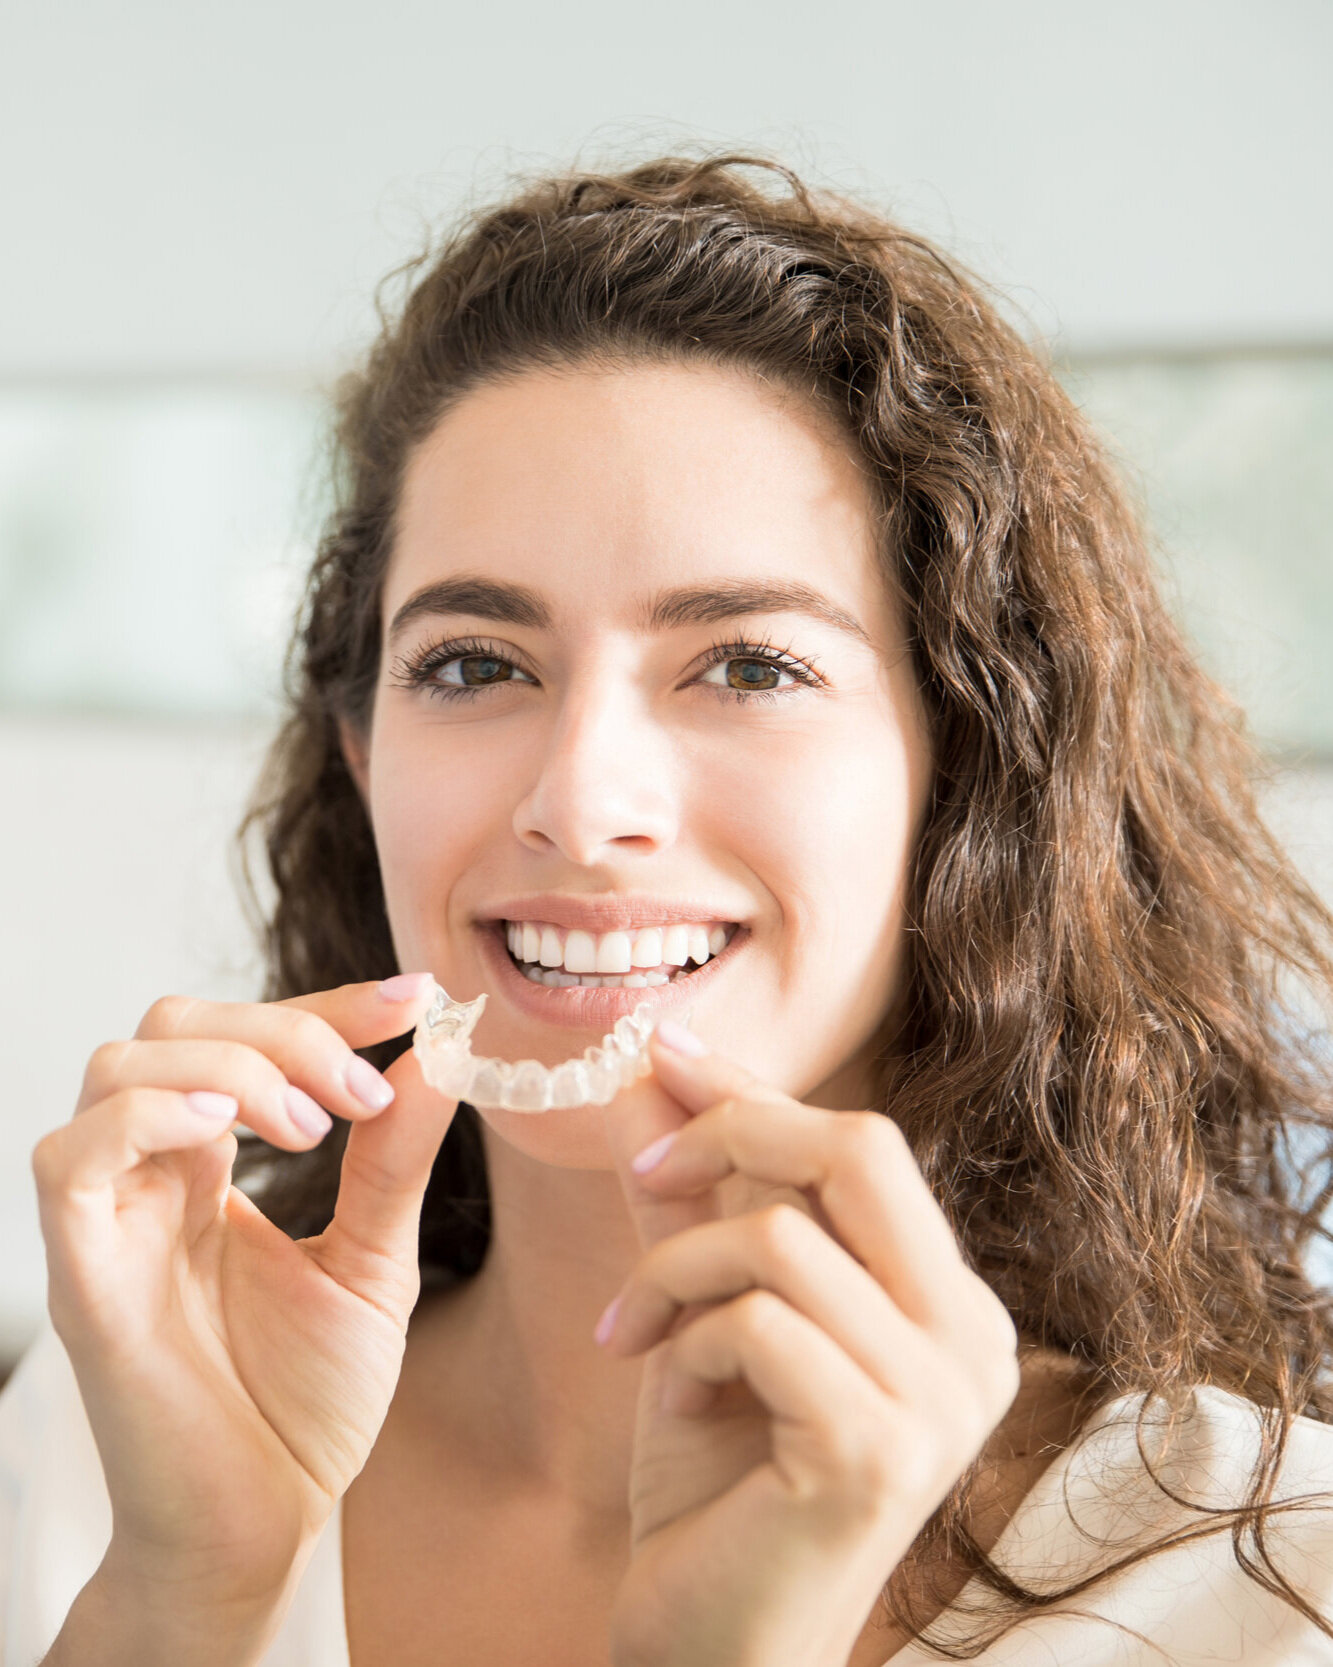  Orthodontic Benefits Ending Soon? Use Them or Lose Them! — Crossley Ortho